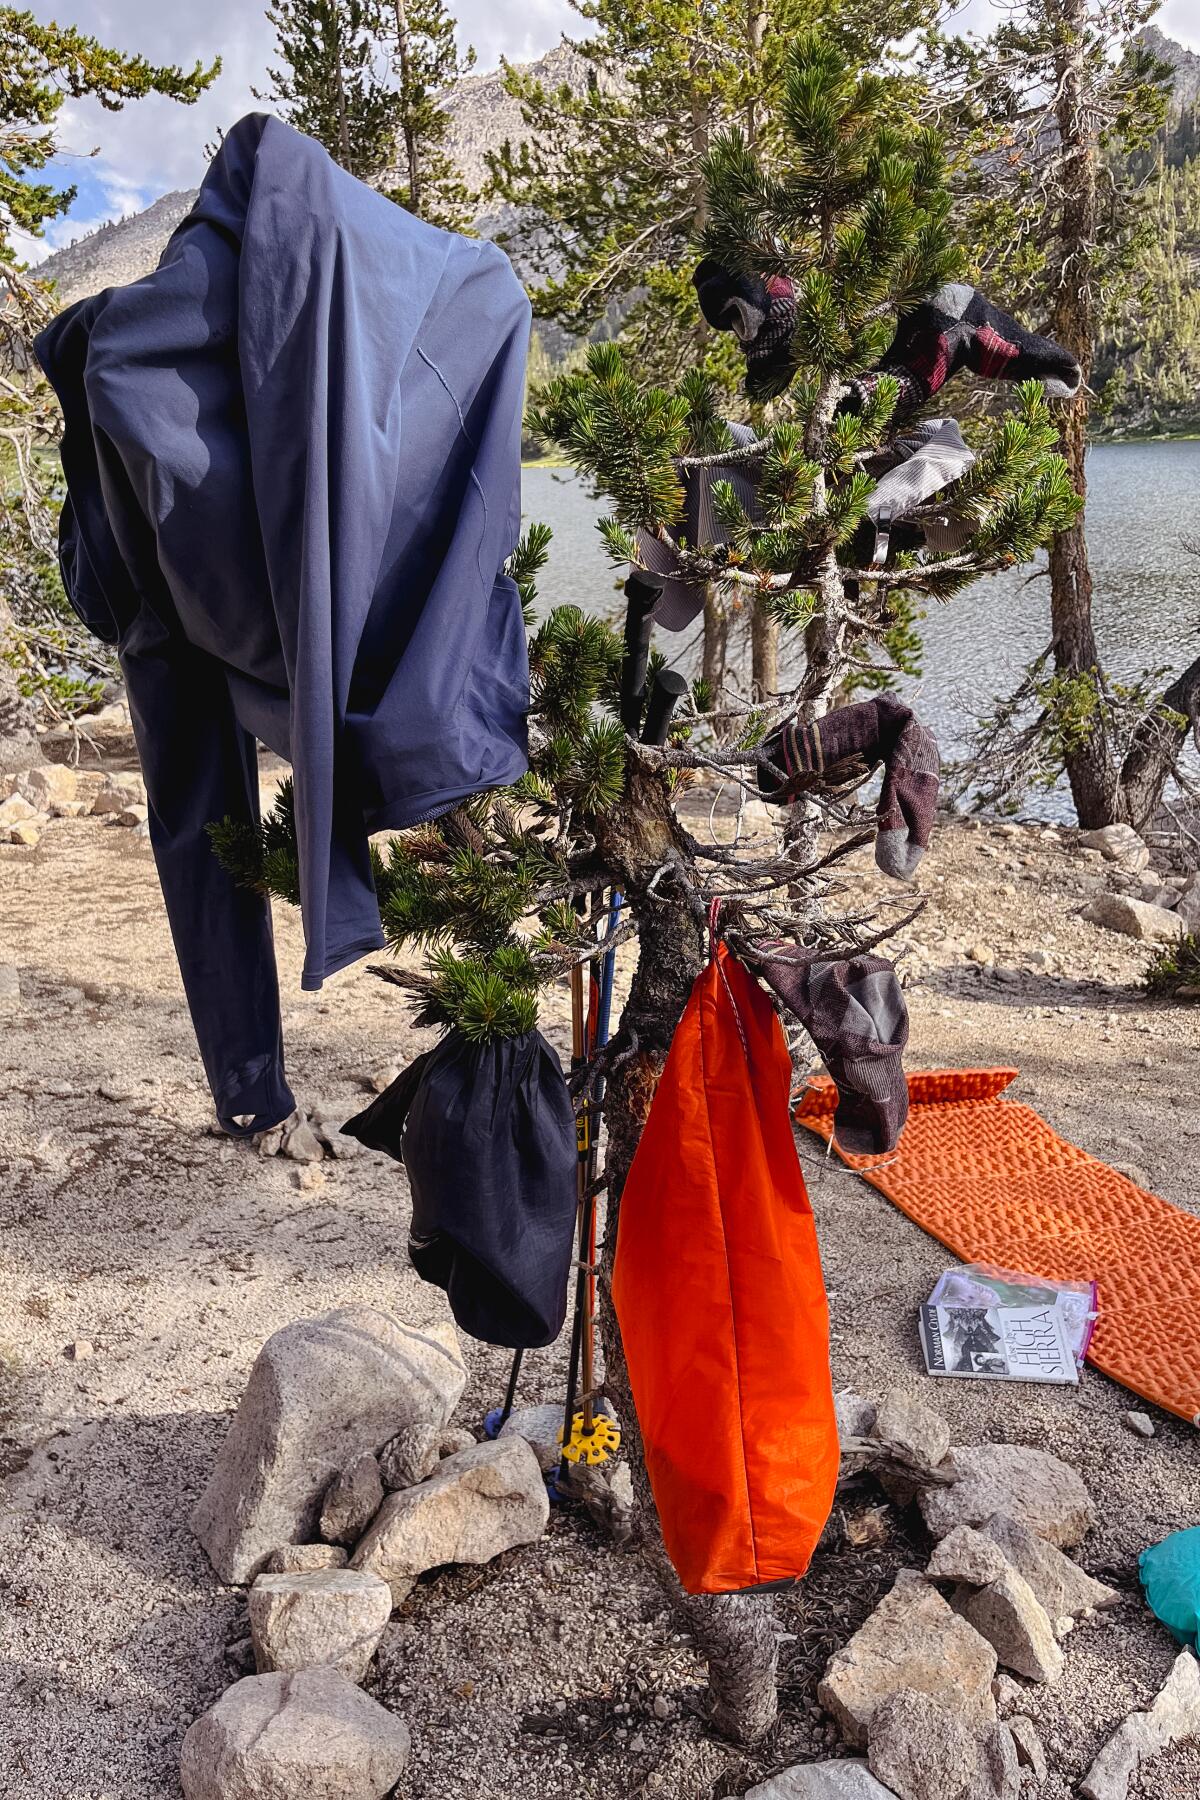 Clothing and camping gear hang on a tree near a lake. 